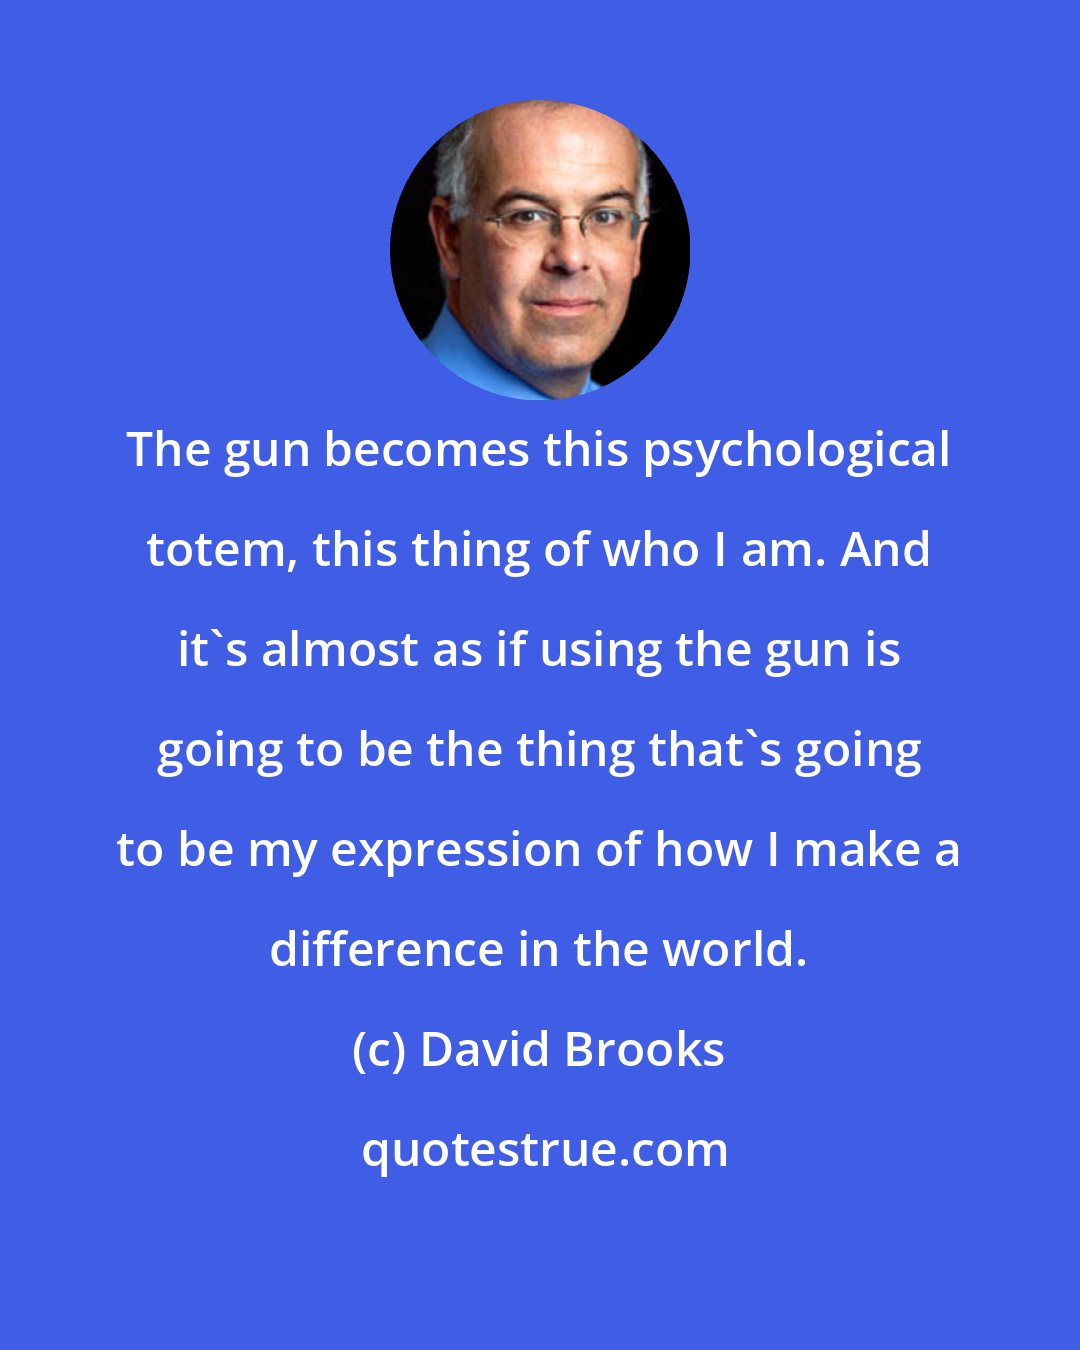 David Brooks: The gun becomes this psychological totem, this thing of who I am. And it's almost as if using the gun is going to be the thing that's going to be my expression of how I make a difference in the world.